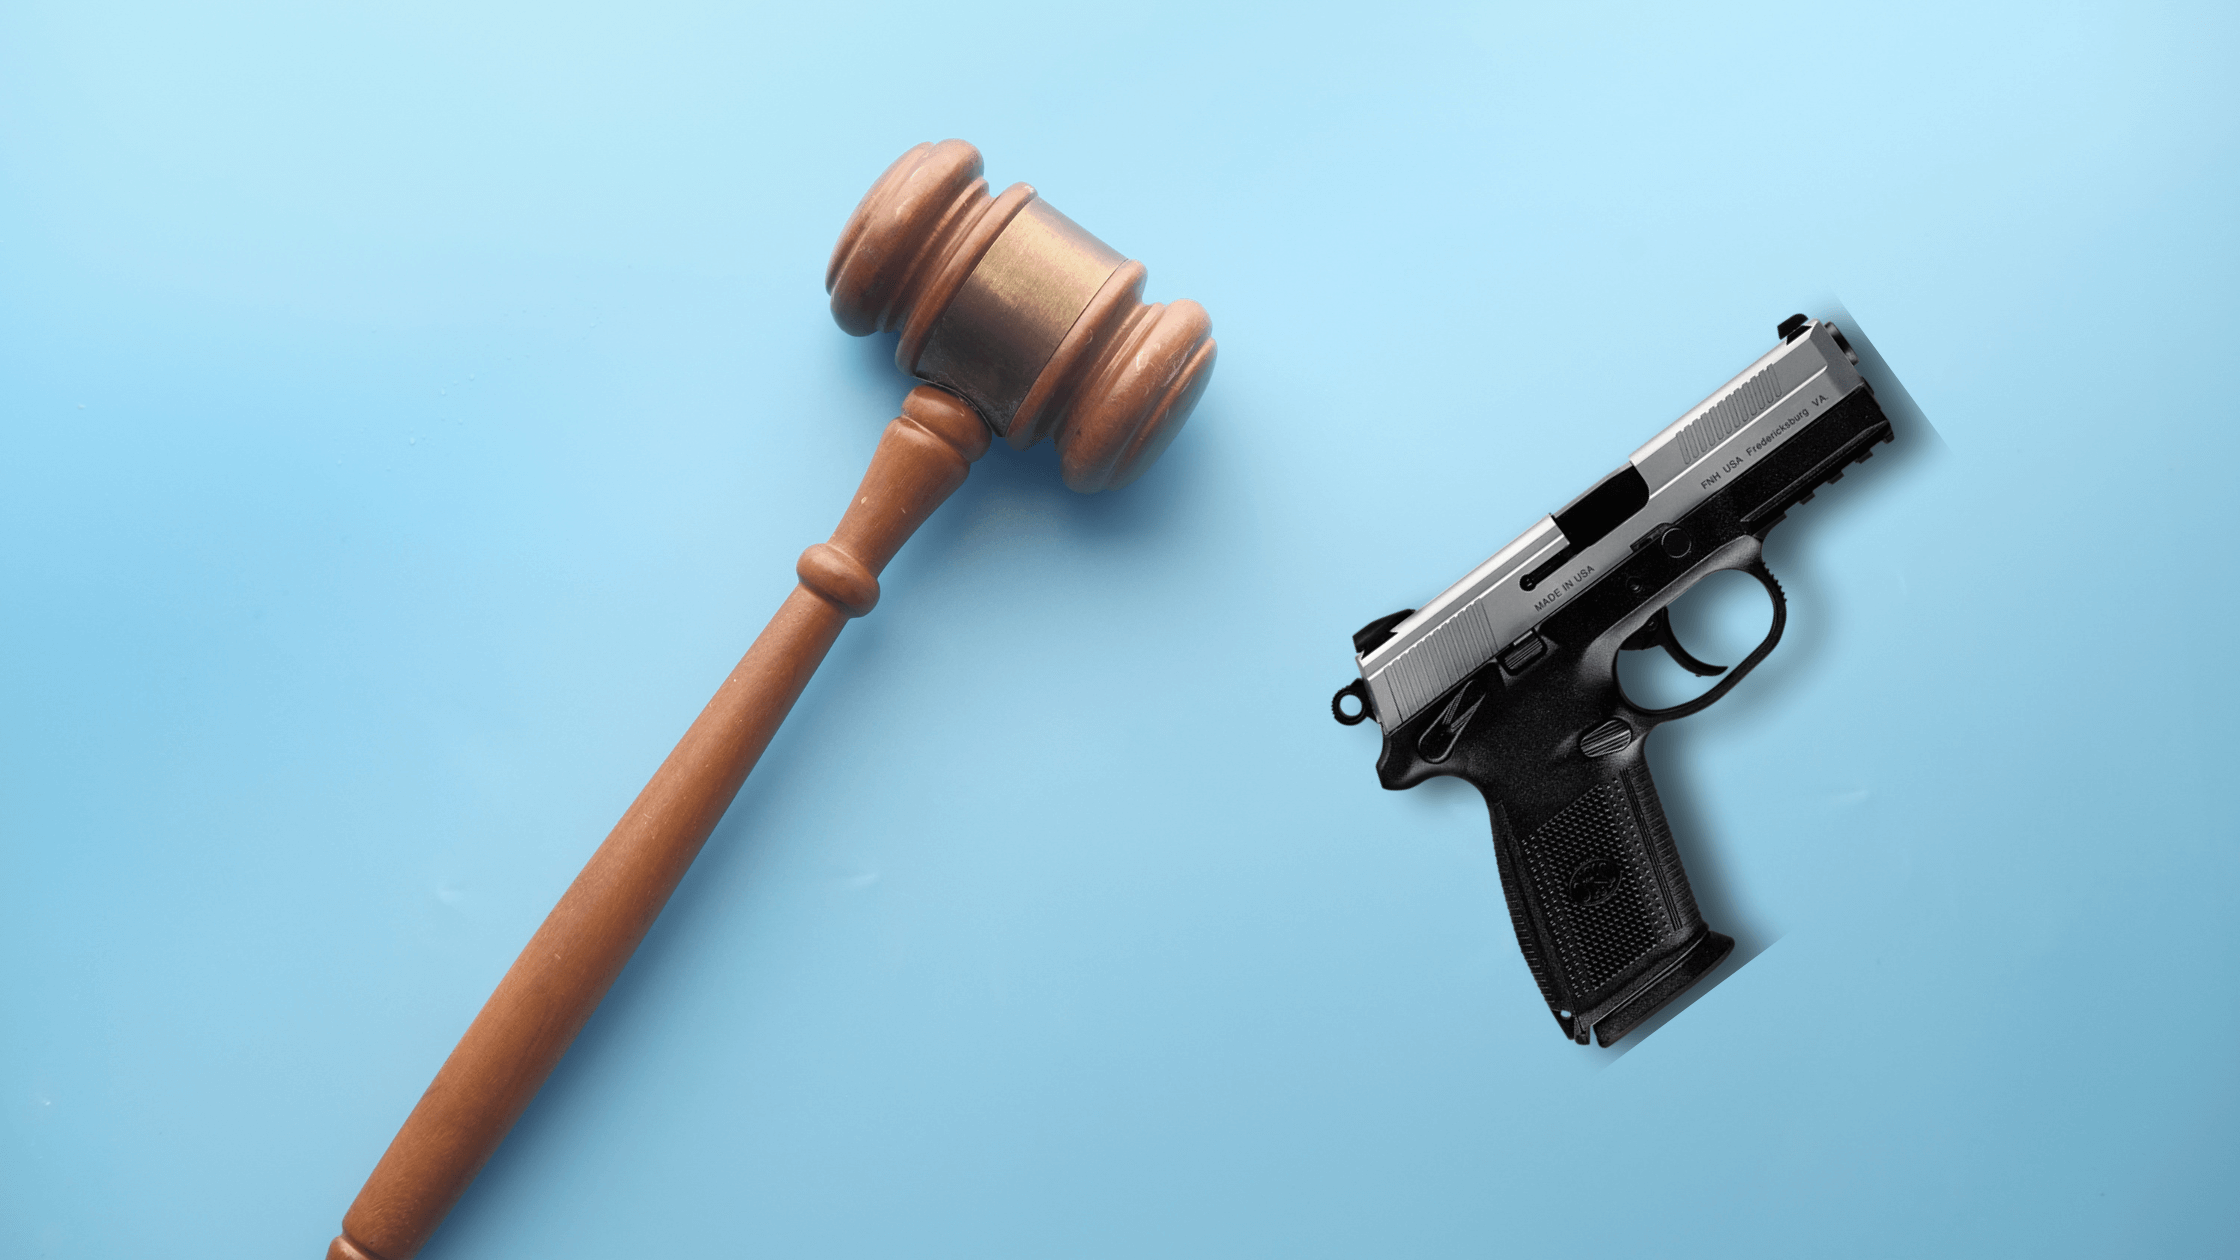 Gavel and pistol on blue background, representing law, order, and force.